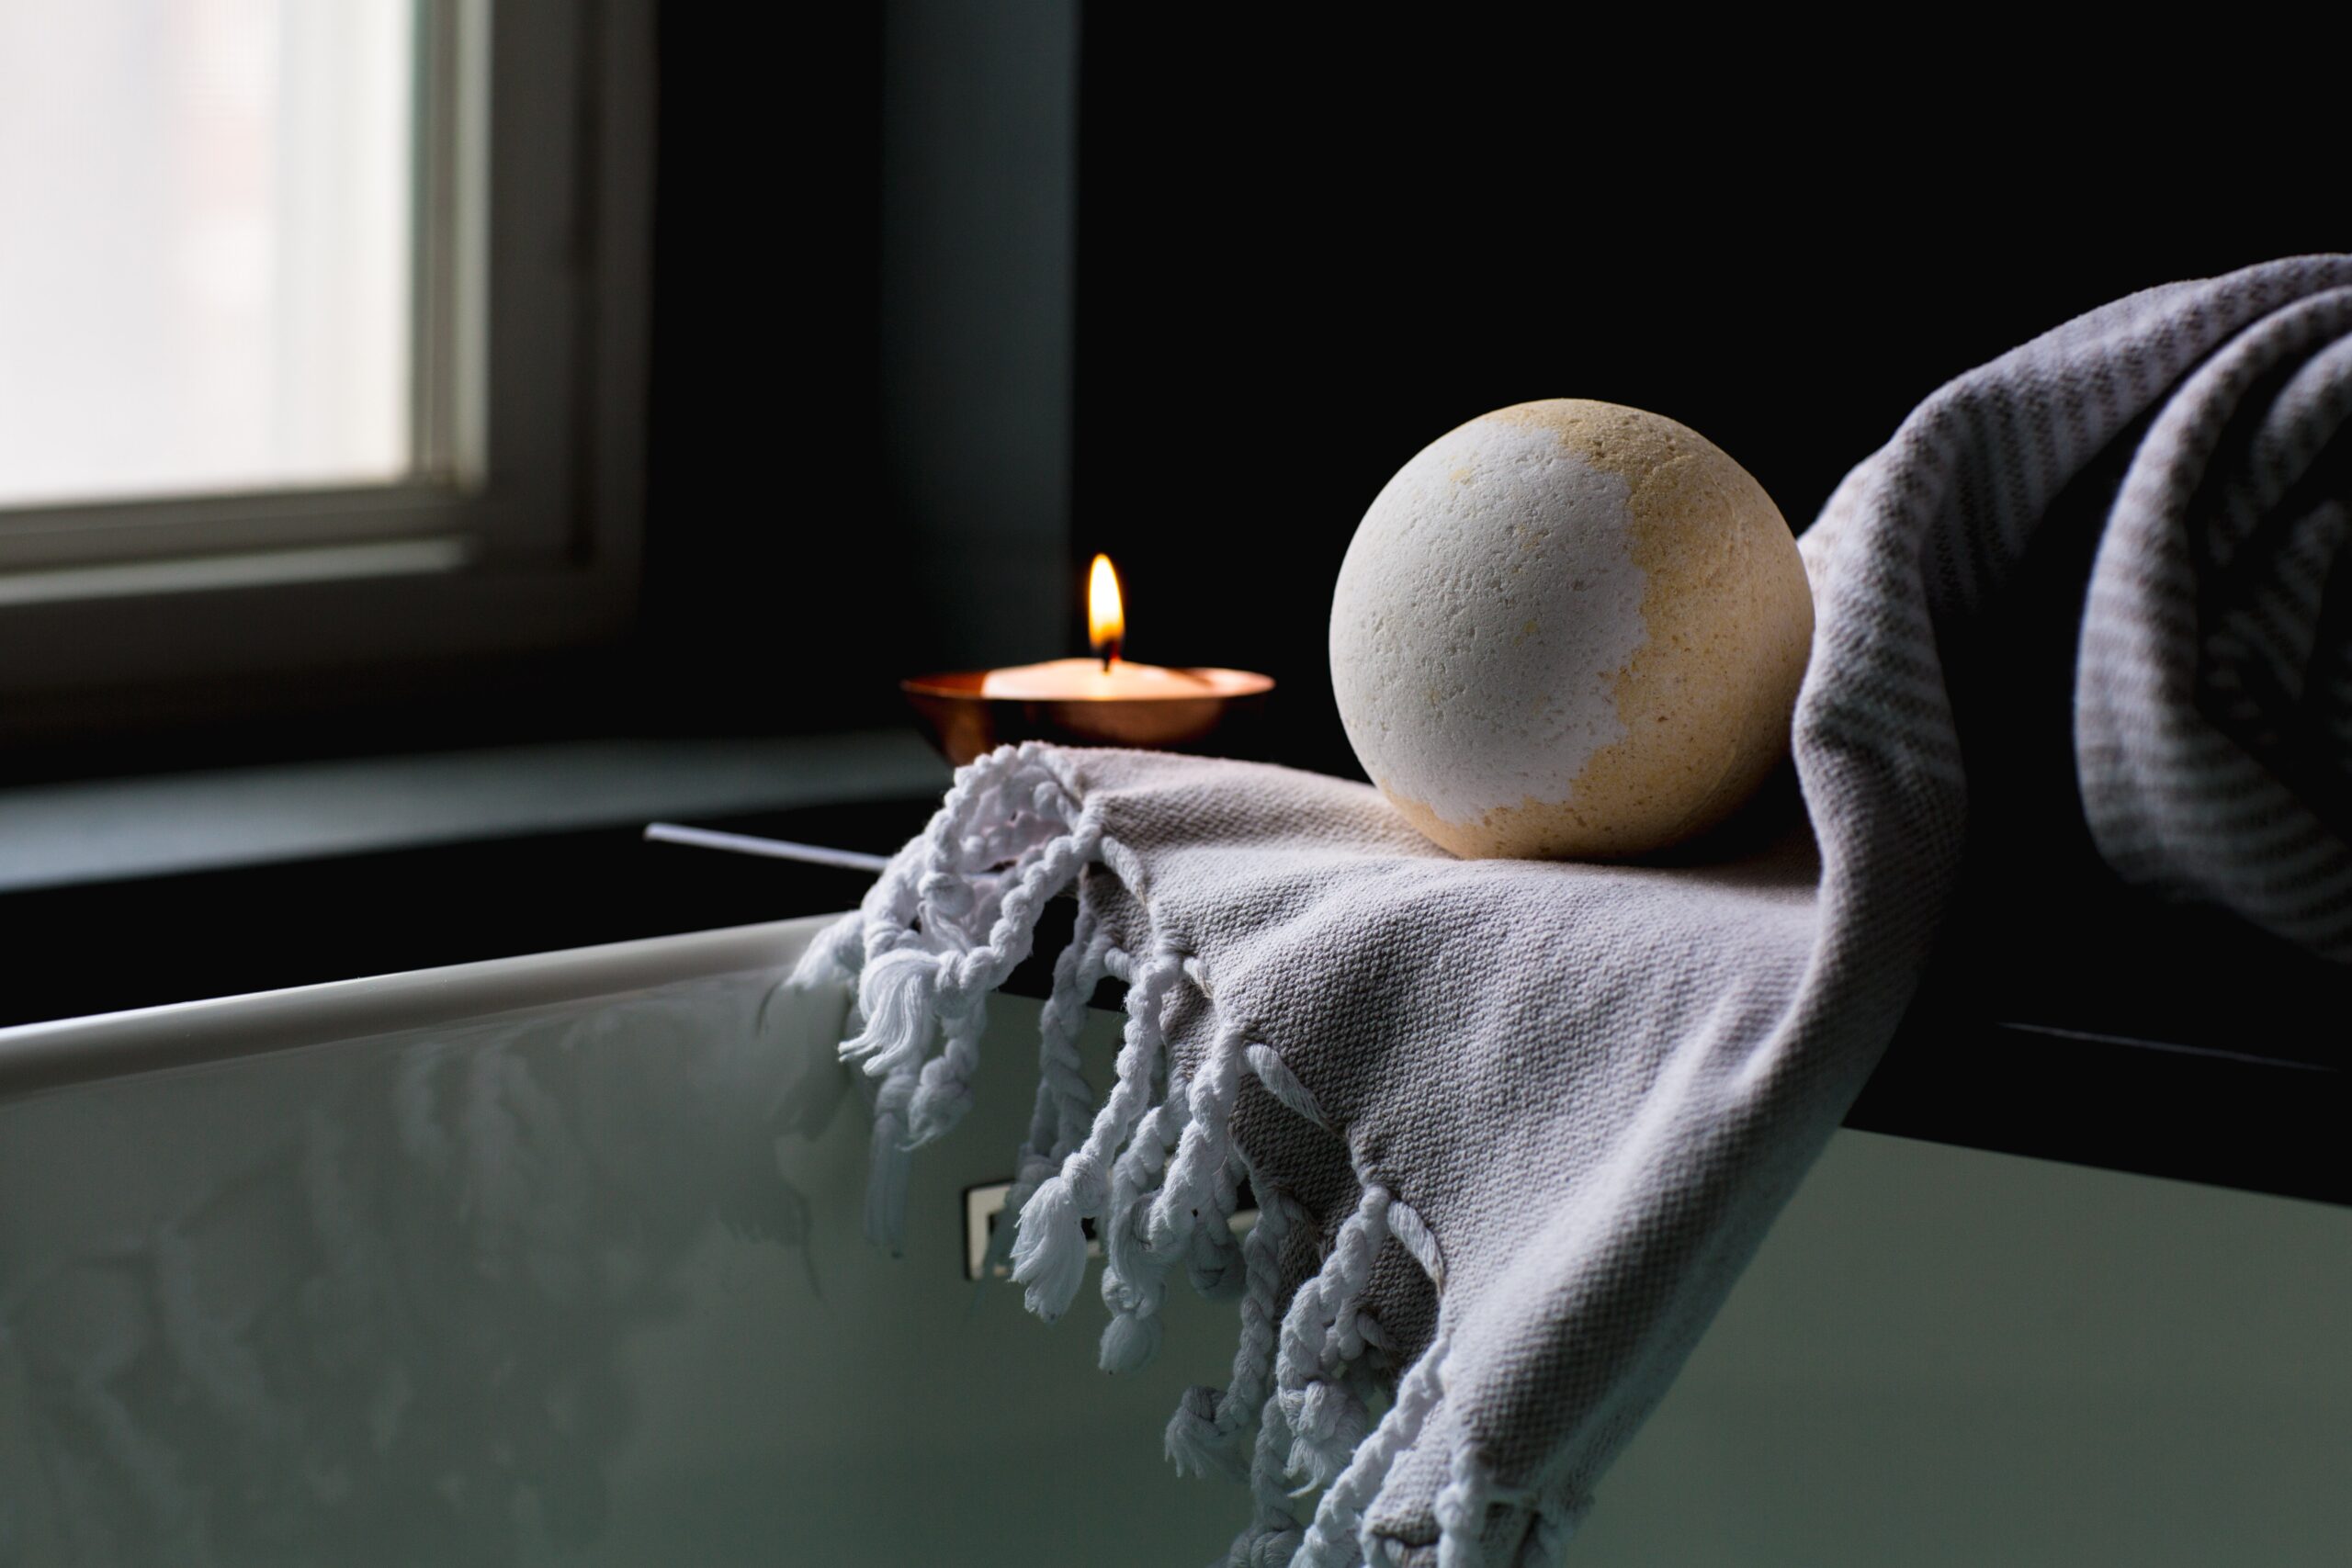 A lit tea light in a small dish with a orangish white bath bomb on a towel in the forefront